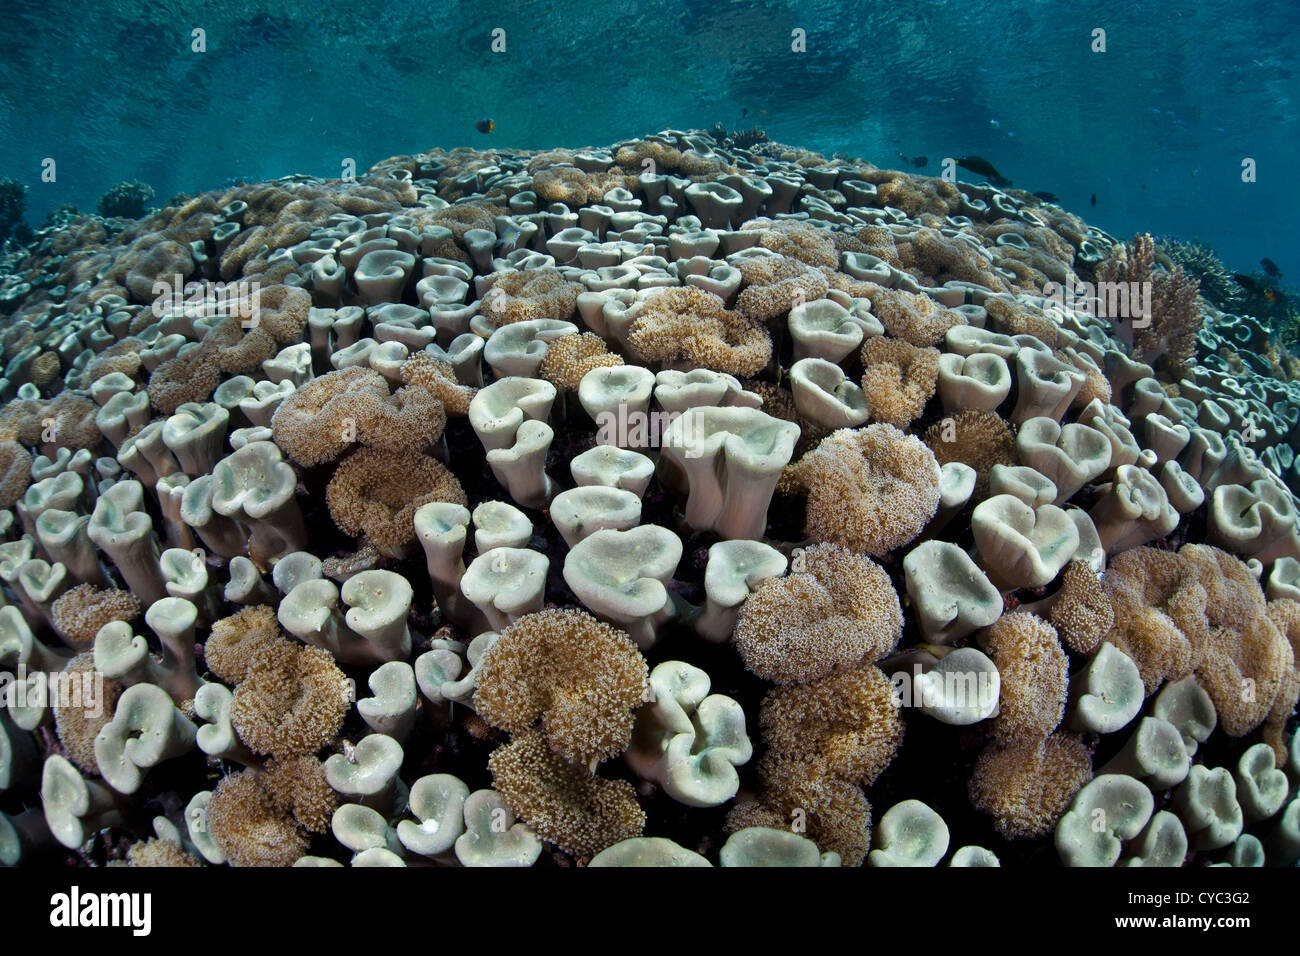 A garden of soft leather mushroom corals, Sarcophyton sp., grows on a shallow reef slope in the western Pacific. Stock Photo